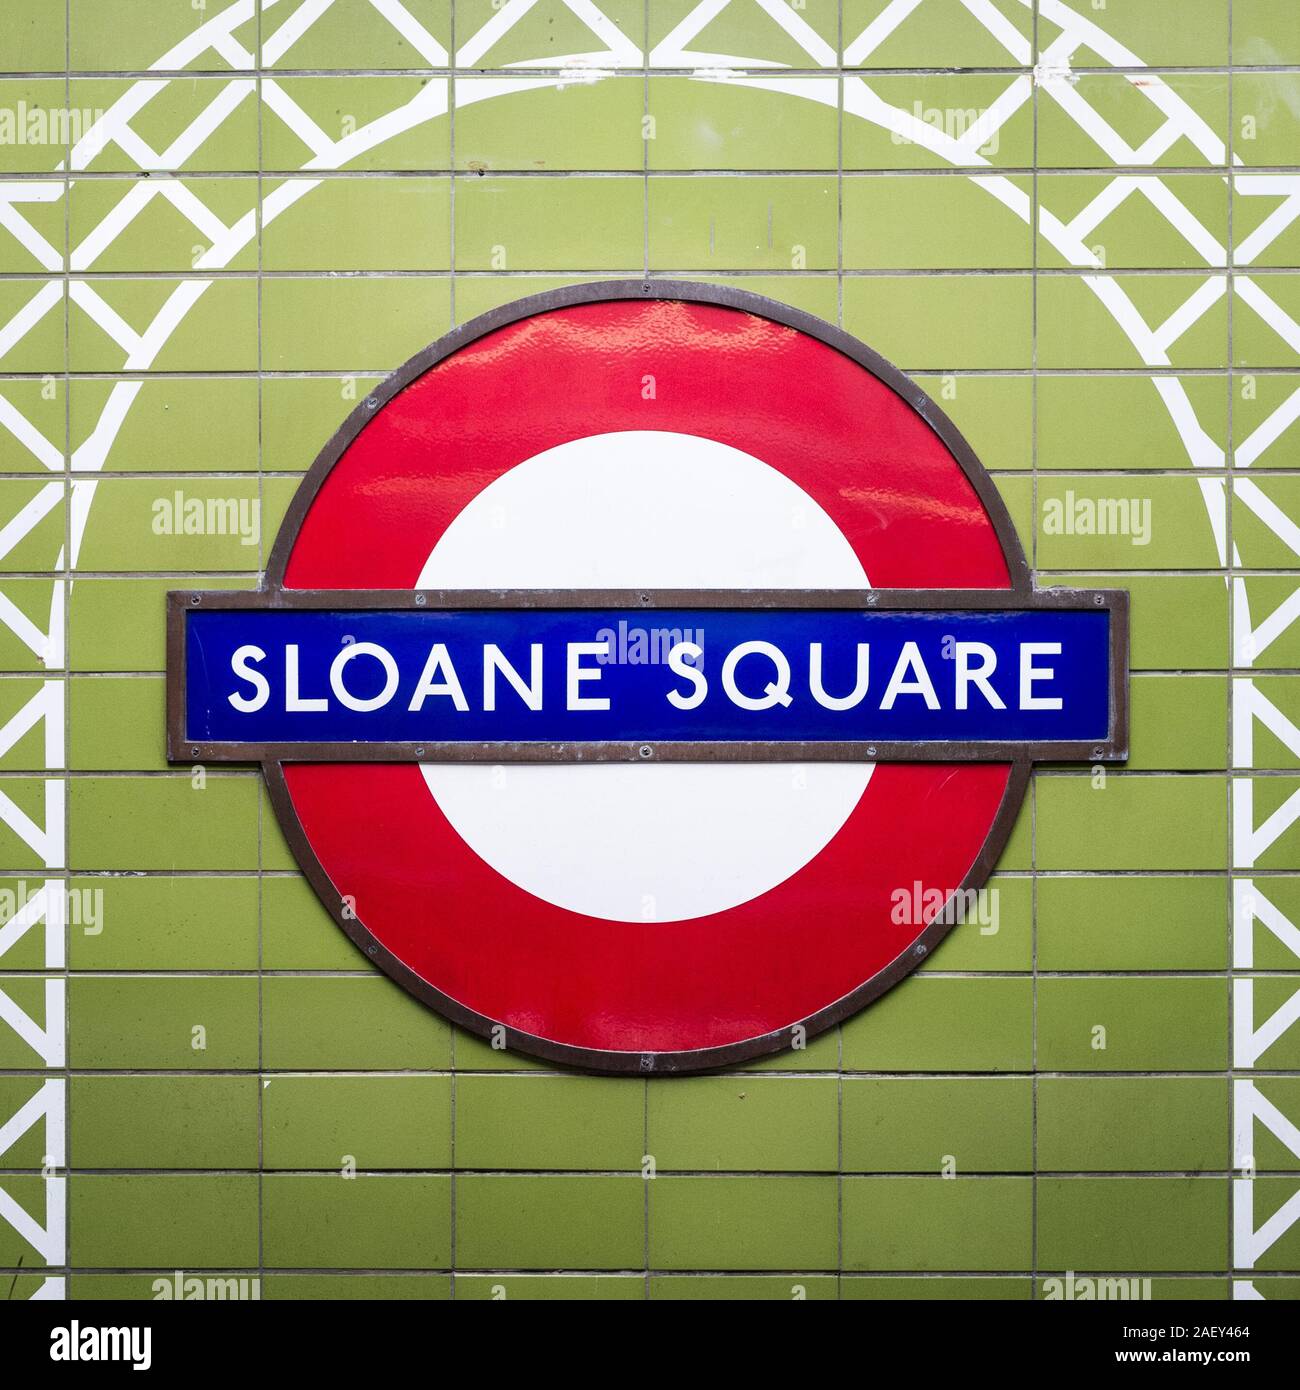 Sloane Square tube station. A platform sign for the London Underground station on the Circle and District Lines. Stock Photo